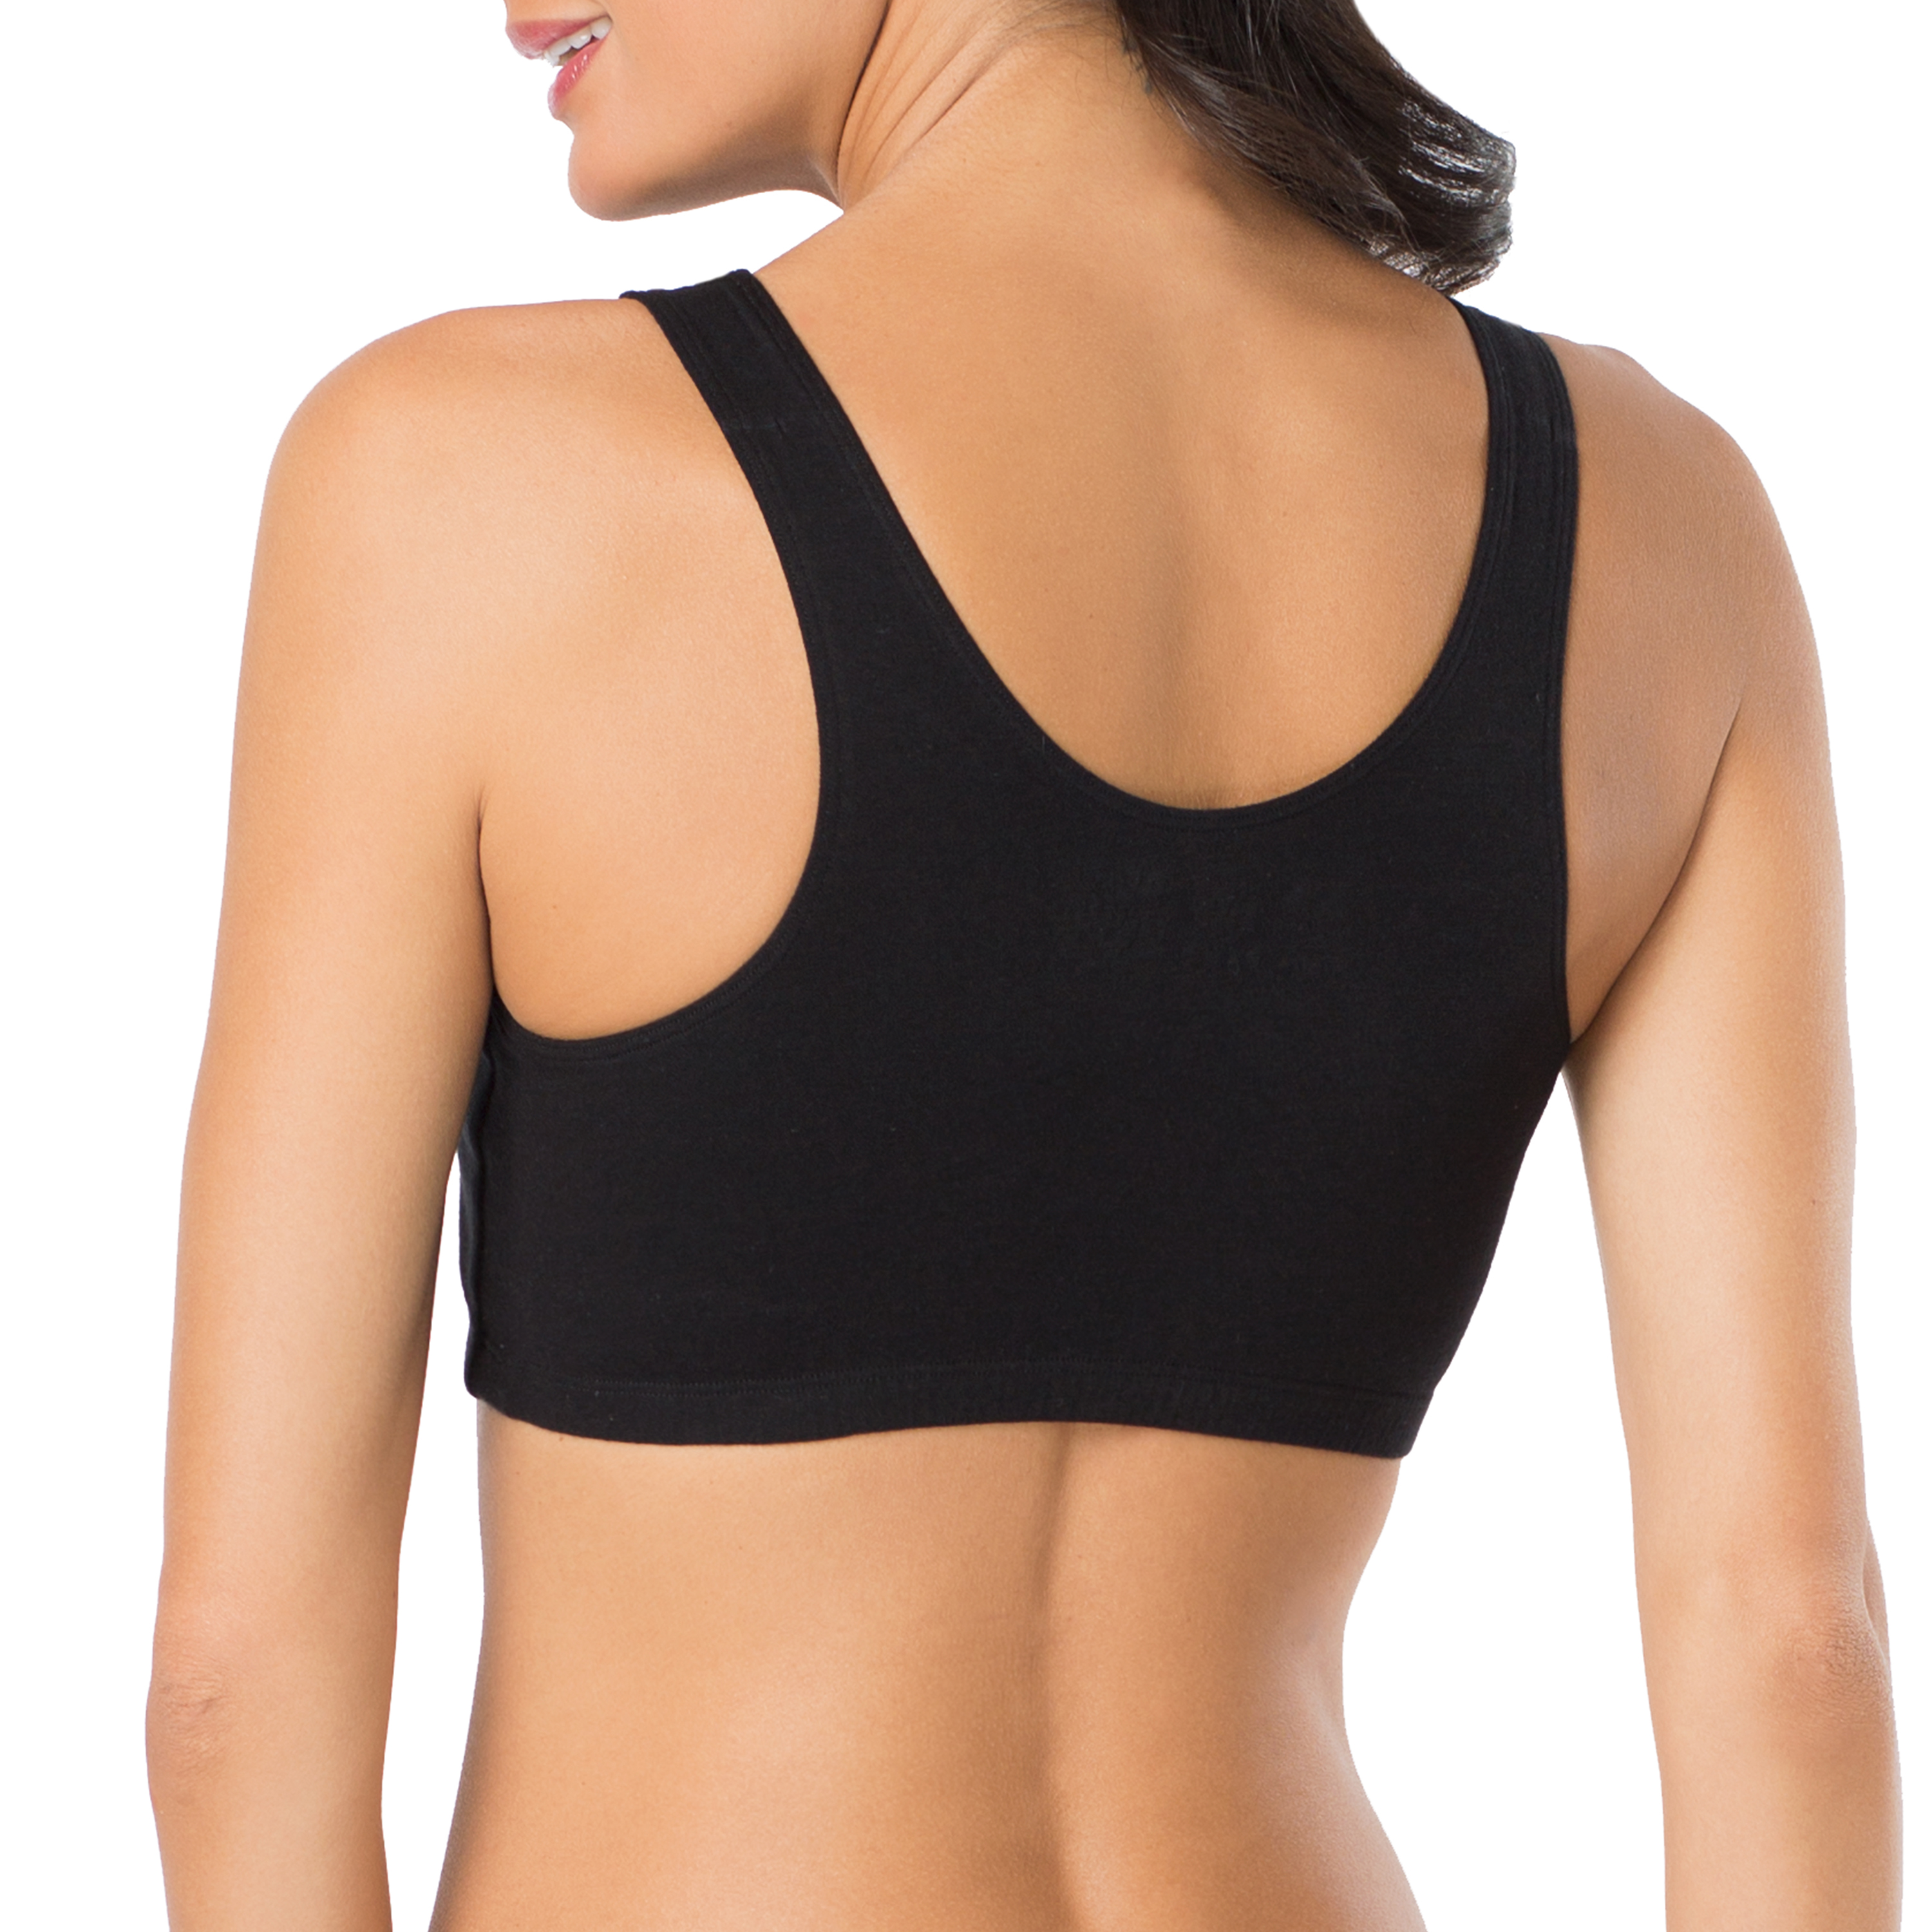 Fruit of the Loom Women's Tank Style Cotton Sports Bra, 3-Pack, Style-9012 - image 3 of 8